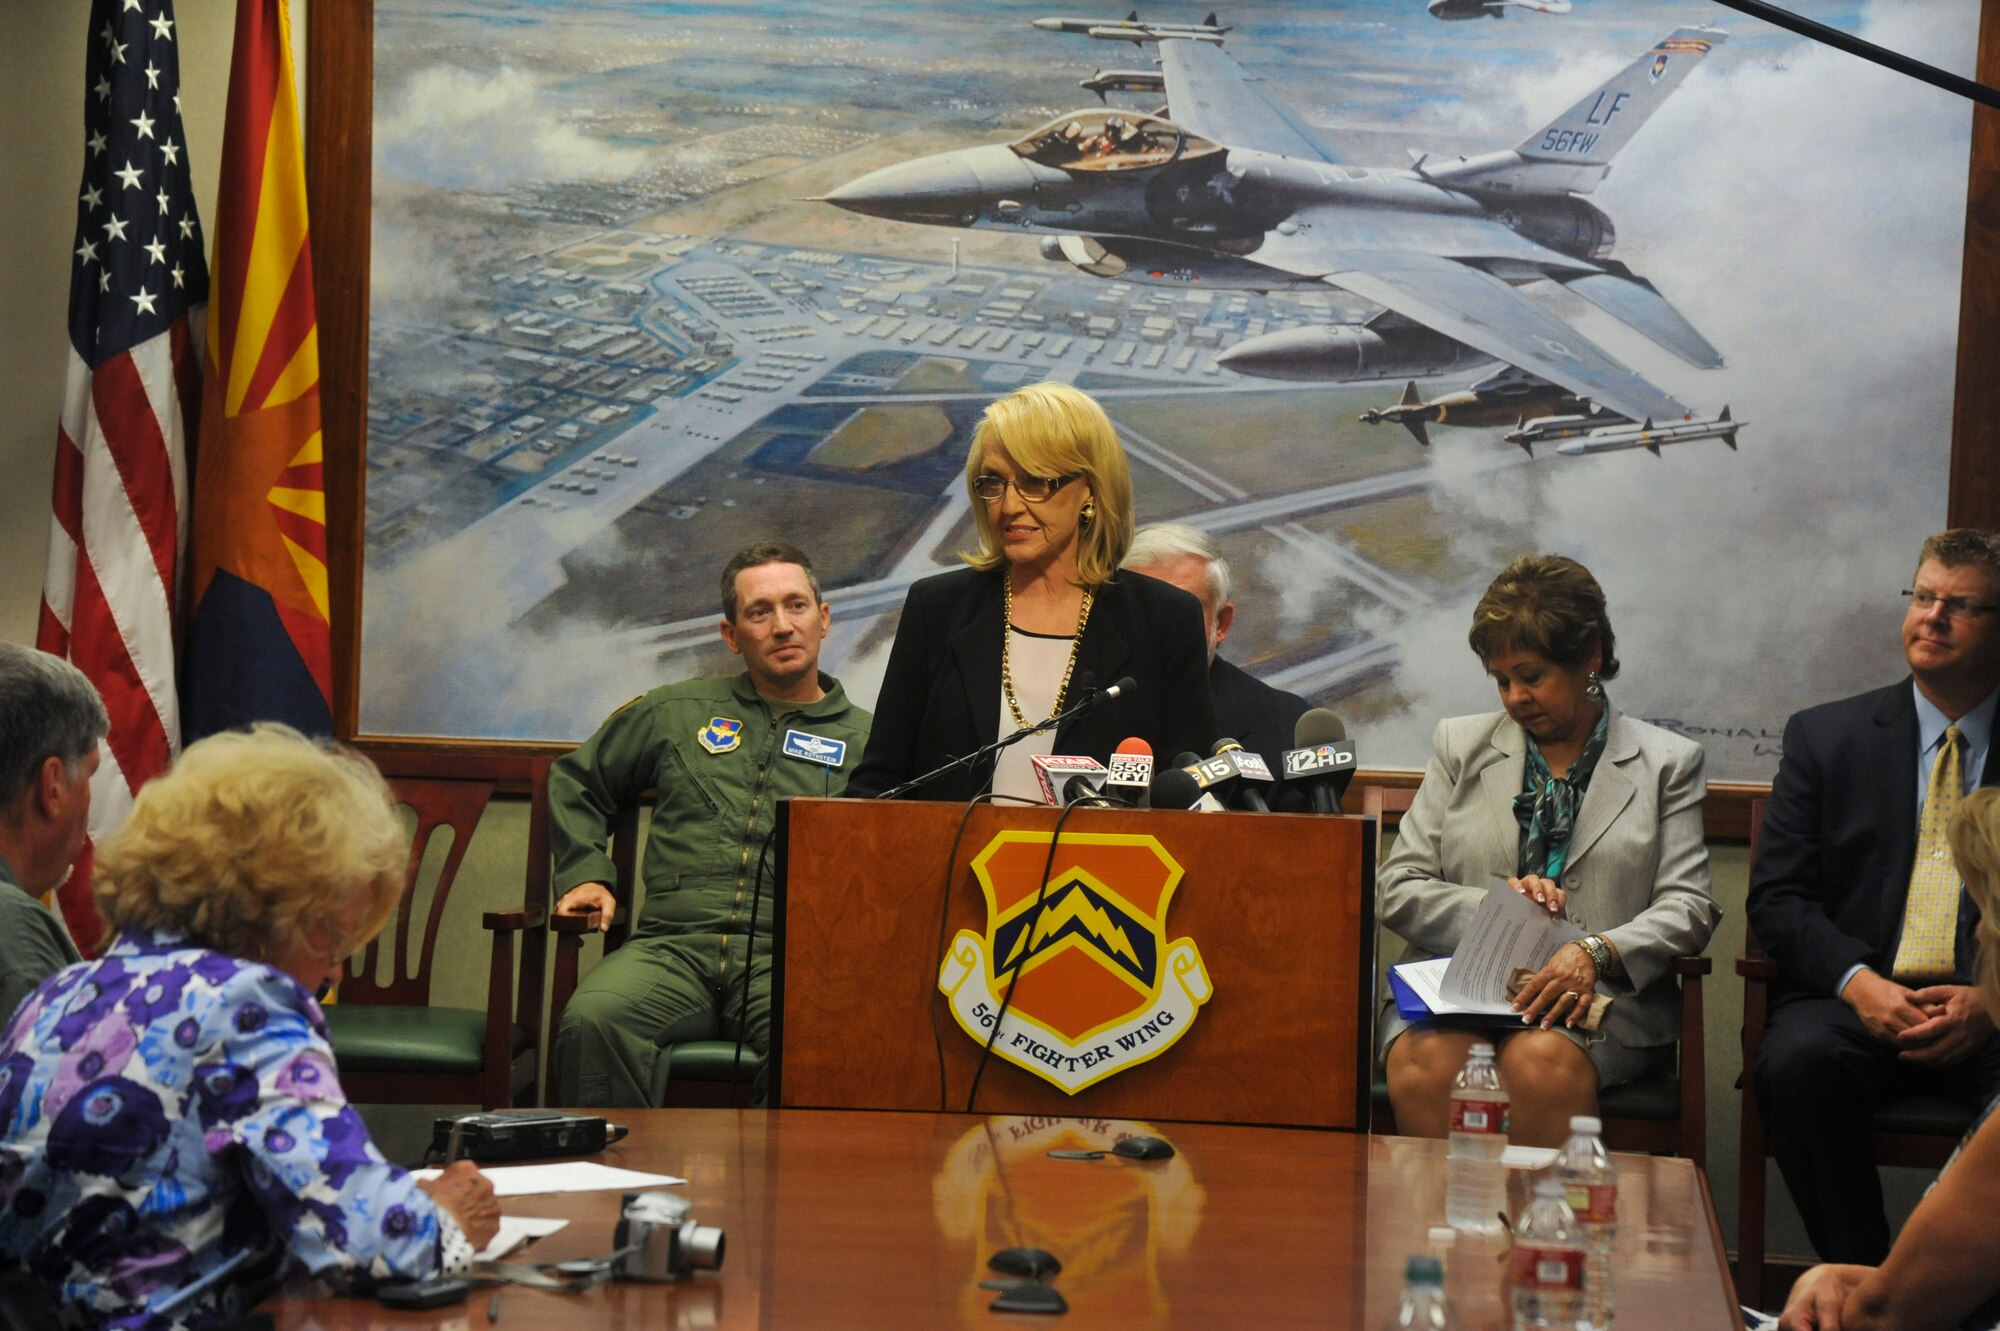 Arizona Governor Janice Brewer speaks to reporters about Luke Air Force Base being chosen as the location for 72 additional F-35A Lighting II aircraft June 27 in the Luke AFB Wing Headquarters Conference Room. The additional aircraft bring the total number of fifth-generation fighters to 144. Aircraft are expected to begin arriving at Luke in spring 2014. (U.S. Air Force photo/Senior Airman David Owsianka)